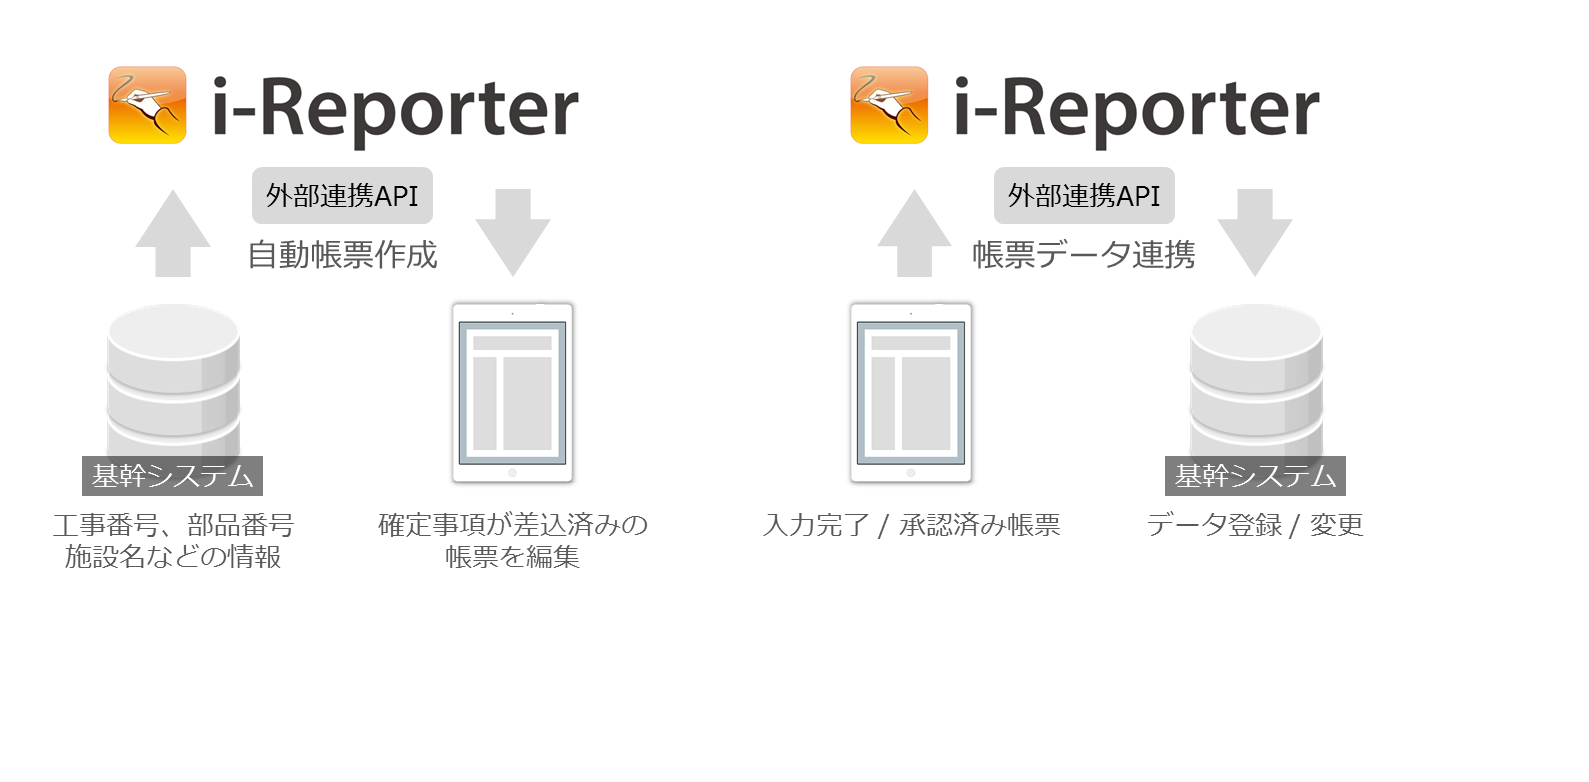 ConMas-i-Reporter-image3-1.png